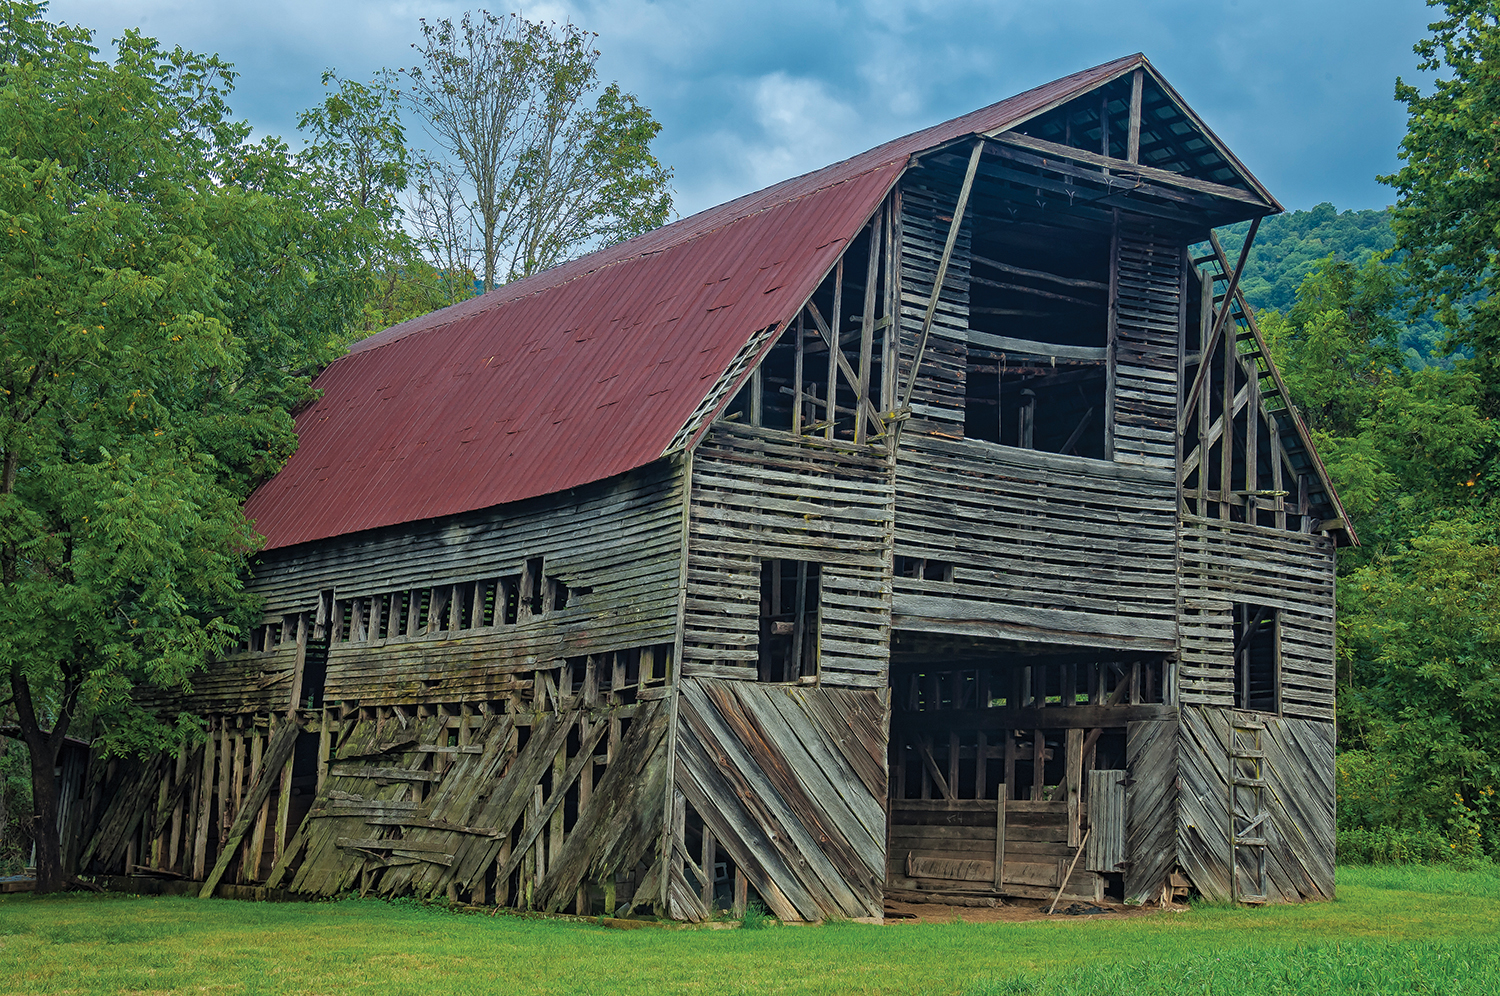 Disused barns in Madison County get noticed for their distinctive lines. On this page: the Delbert Shelton Barn. Photo by EarthSong Photography/Don McGowan.